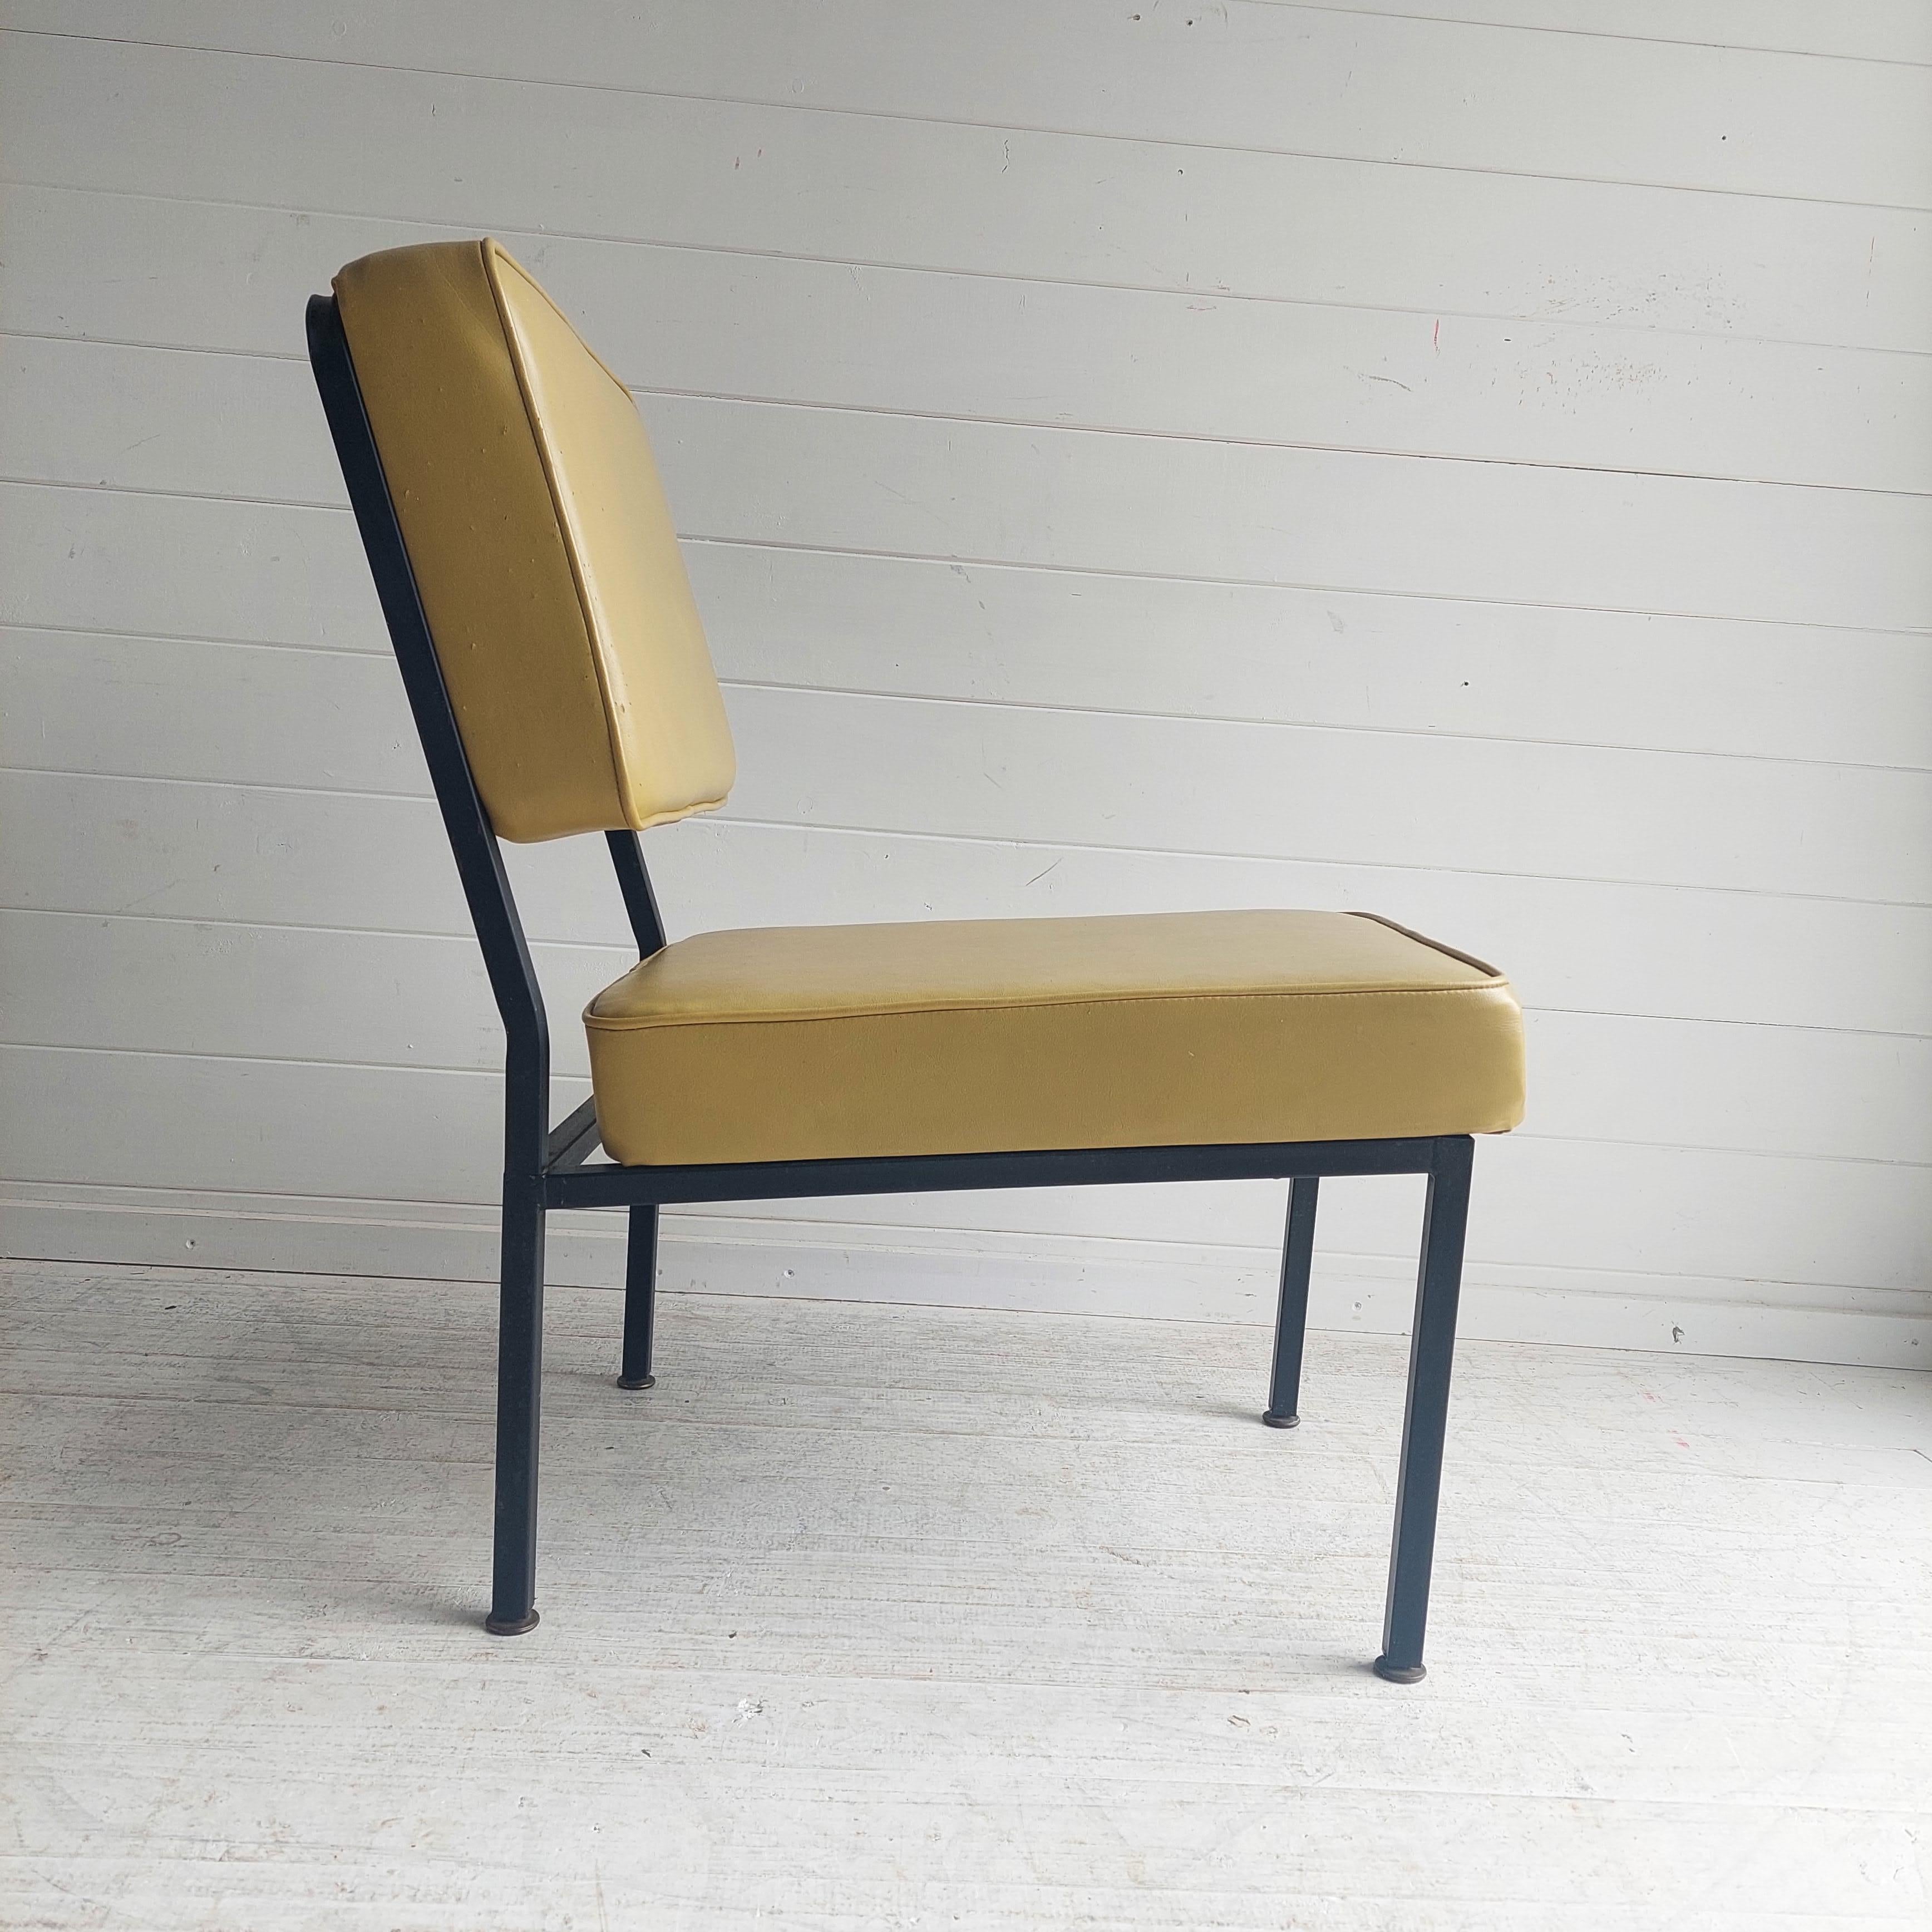 Armchair in the manner of Pierre Guariche 1926-1995. 

Remarkable by the inclination of the backrest and the advance of the seat ensuring comfort and aestheticism.
Seat and backrest dressed in olive green leatherette in the spirit of the 50s. 
Metal